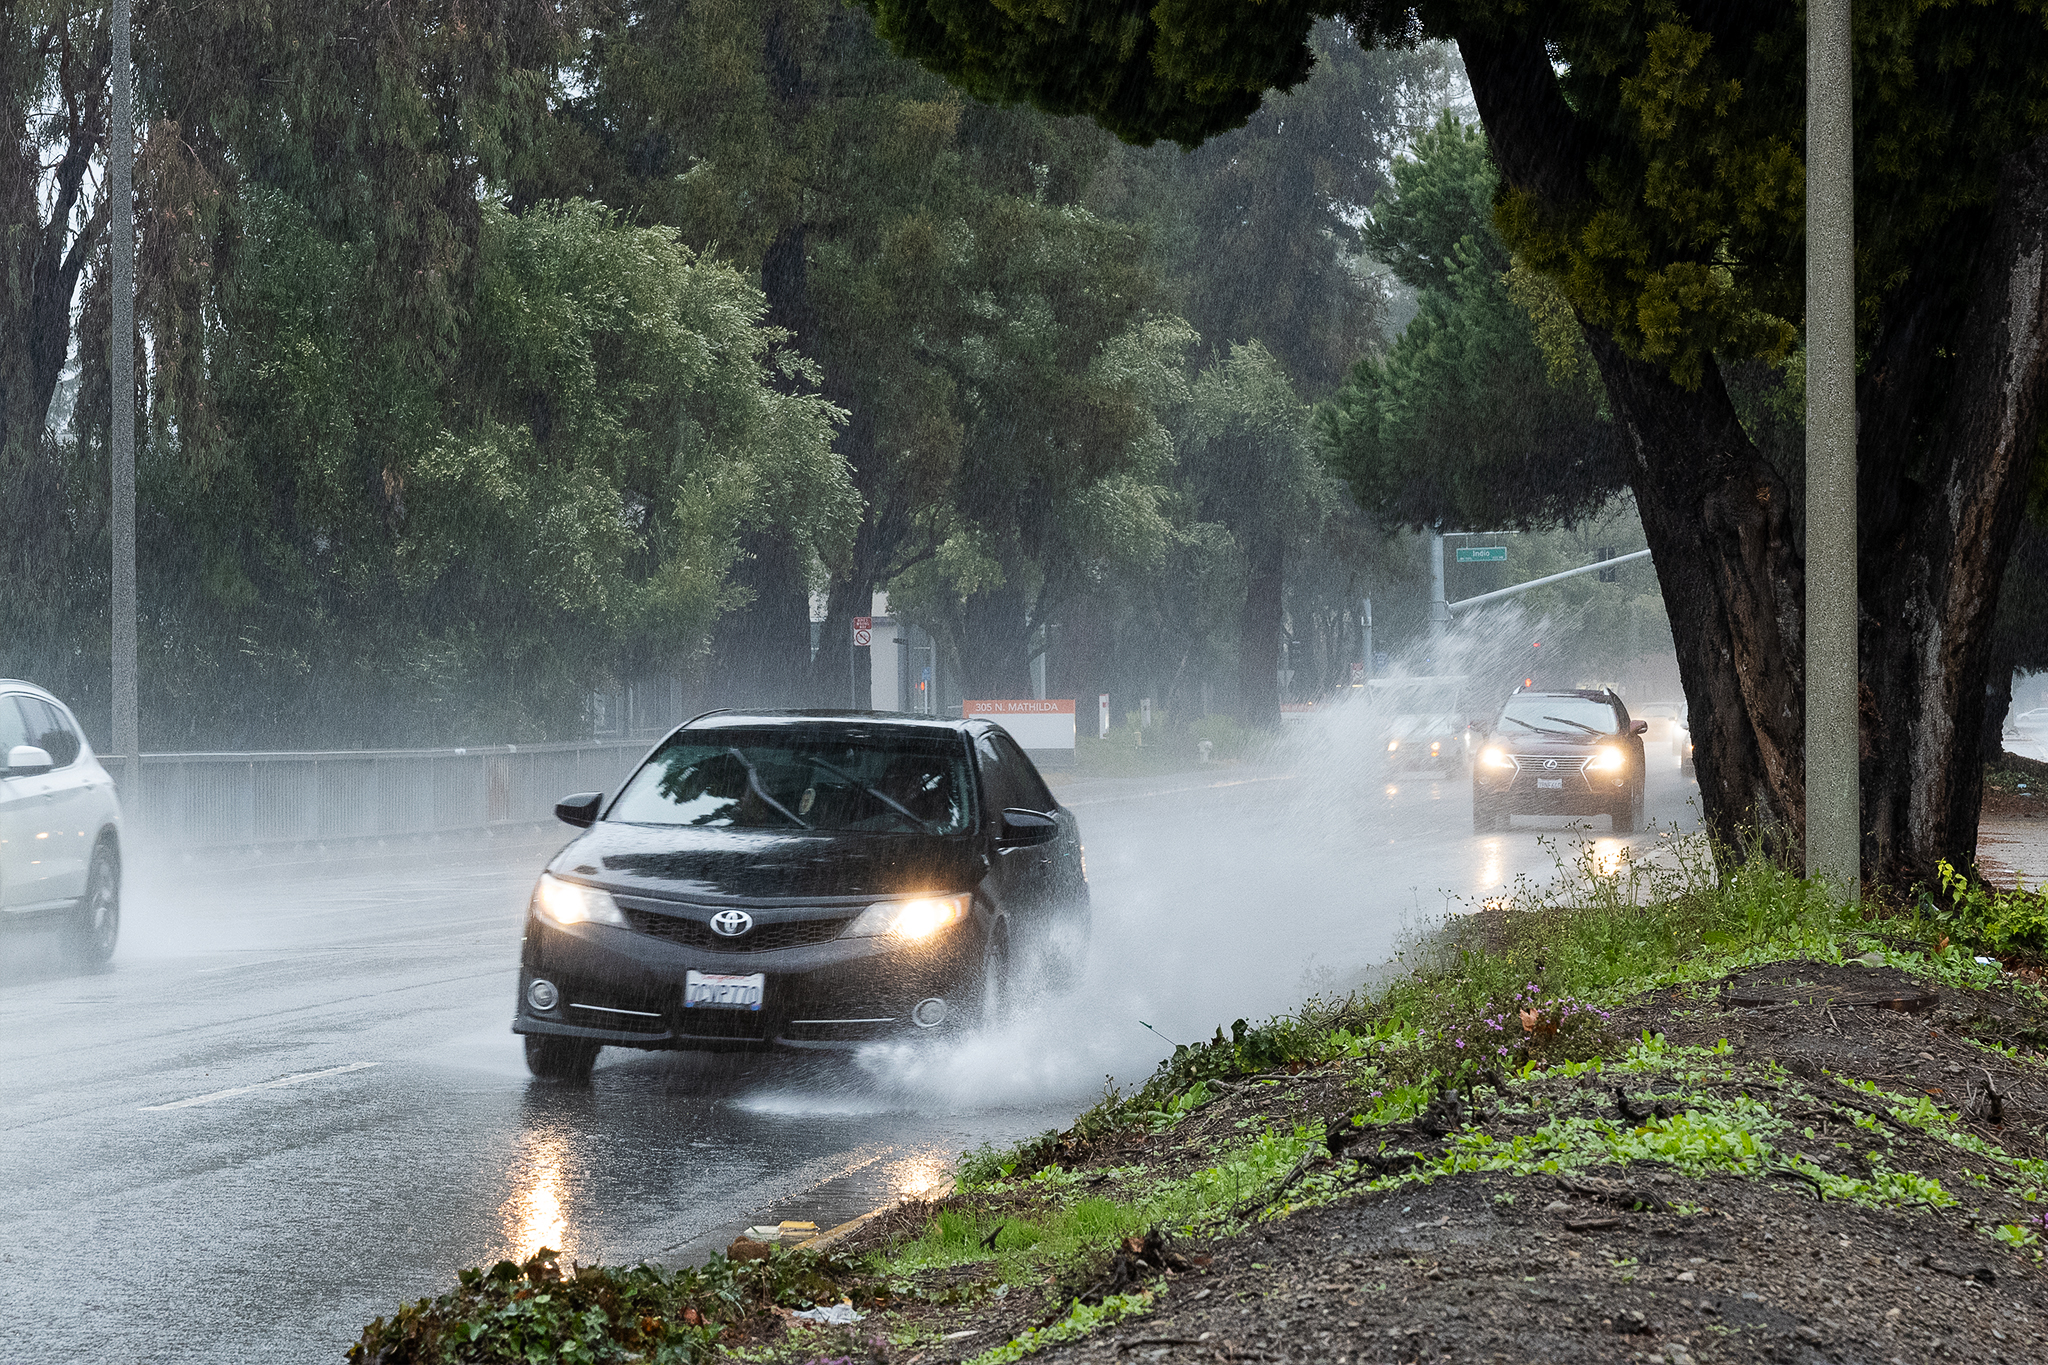 Atmospheric river to bring more heavy rain to SF Bay Area - SFGATE